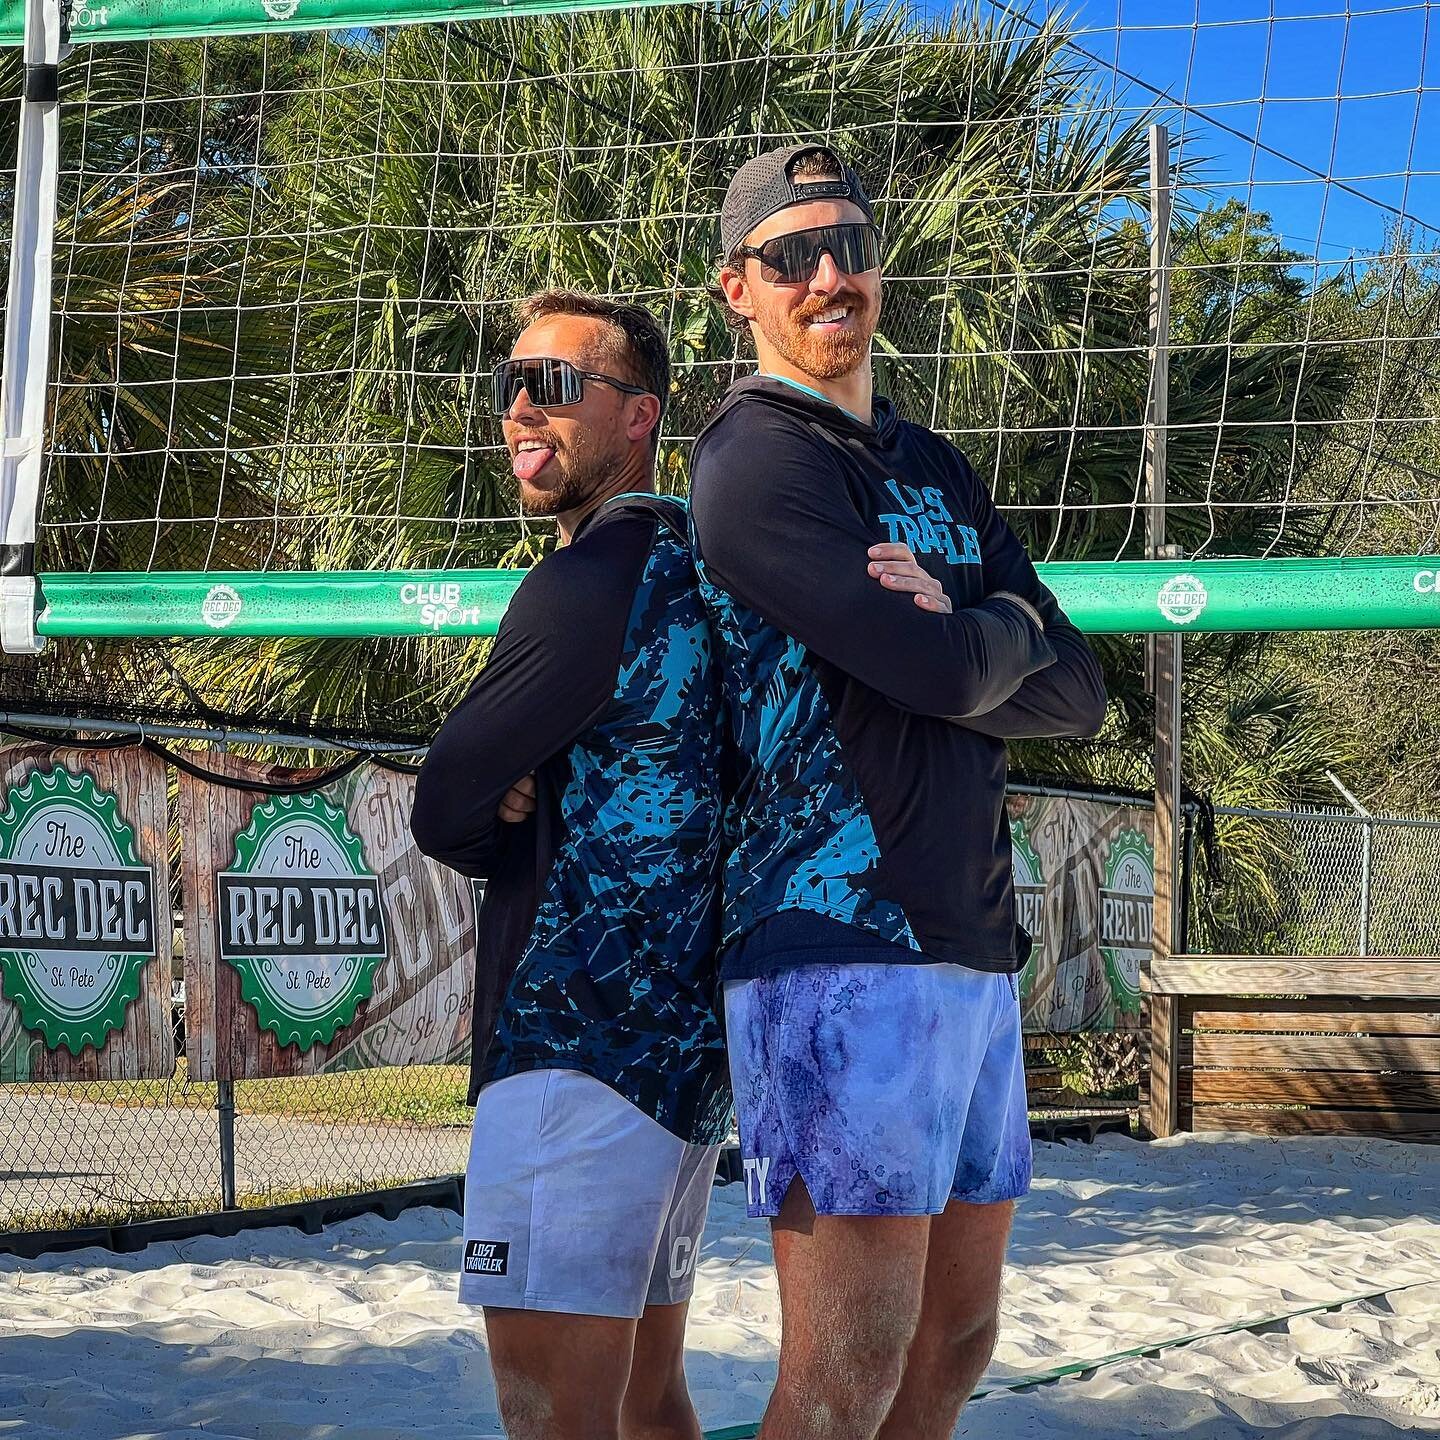 Main Draw starts tomorrow in Virginia Beach! First game at 8a, Vamos Guille! 

Shoutout all our sponsors and coaches who help us prepare to train, travel and compete!
@bevolleyacademy 
@recdecst.pete 
@coach_victor_carneiro 
@iceburgcoldplunge 
@voll